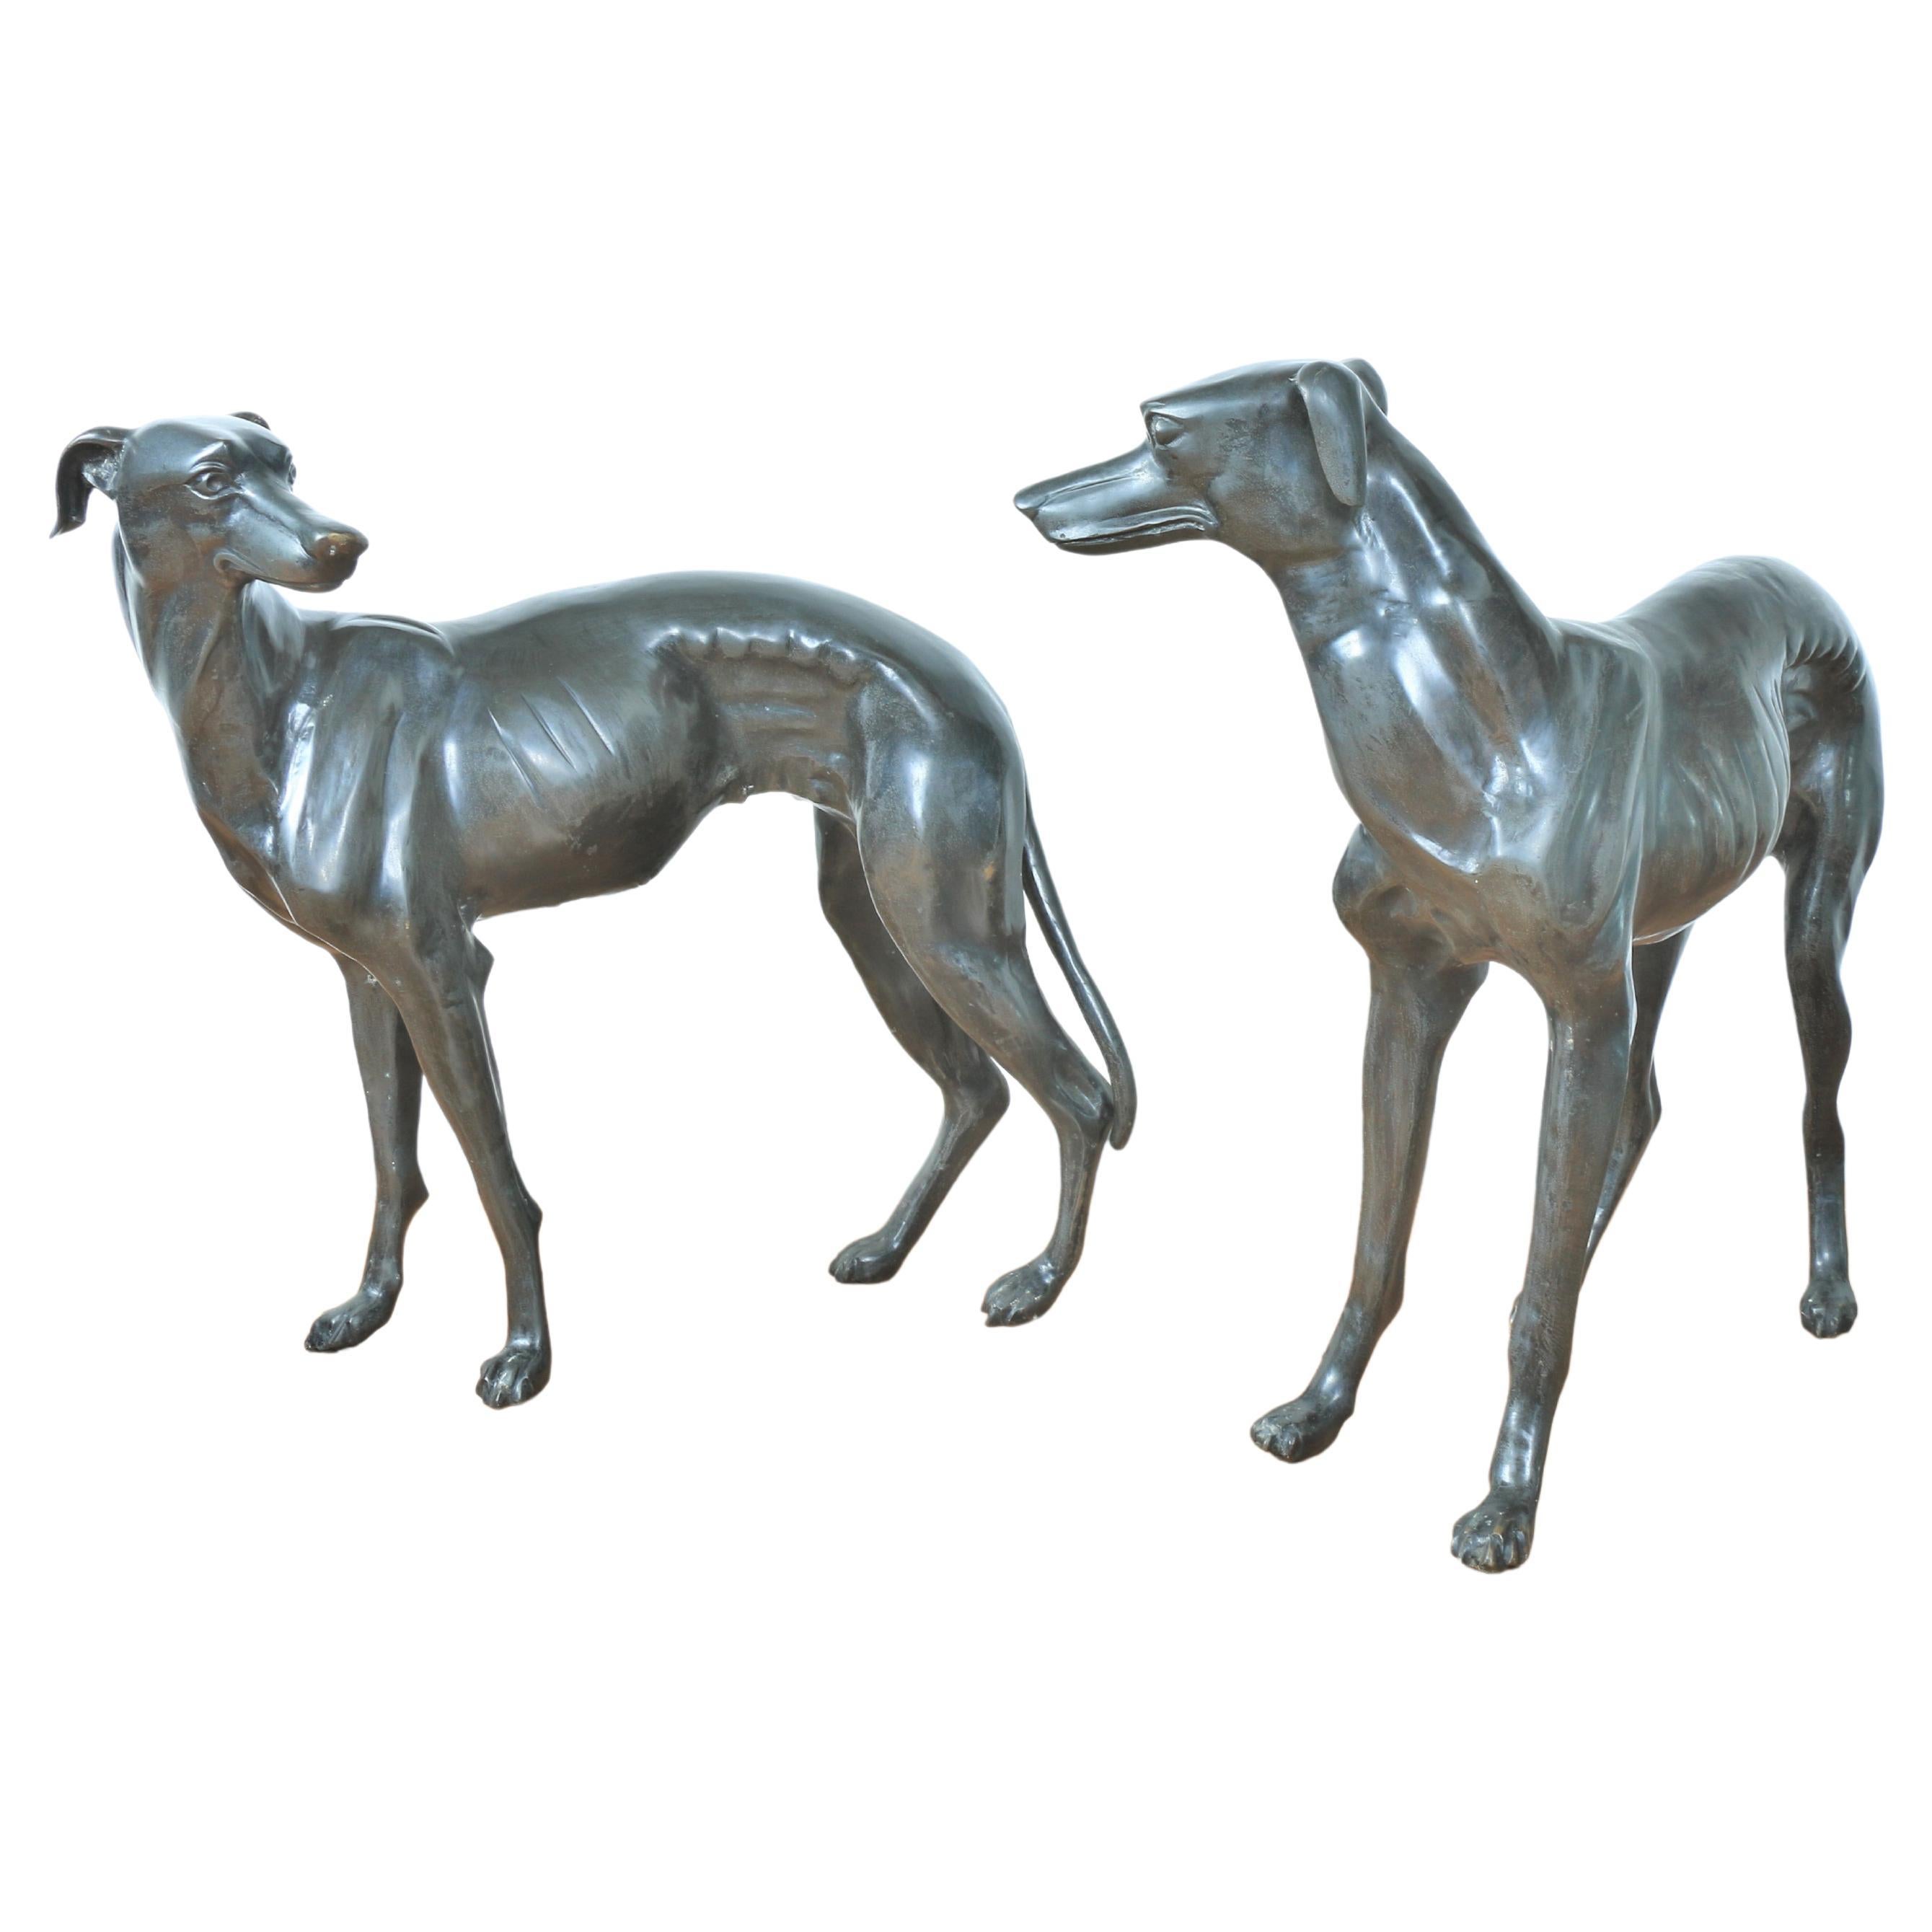 Couple Hounds Figurine Gift Idea Male and Female Greyhounds Sculpture on Base Two Hunting Dogs Vintage Statue